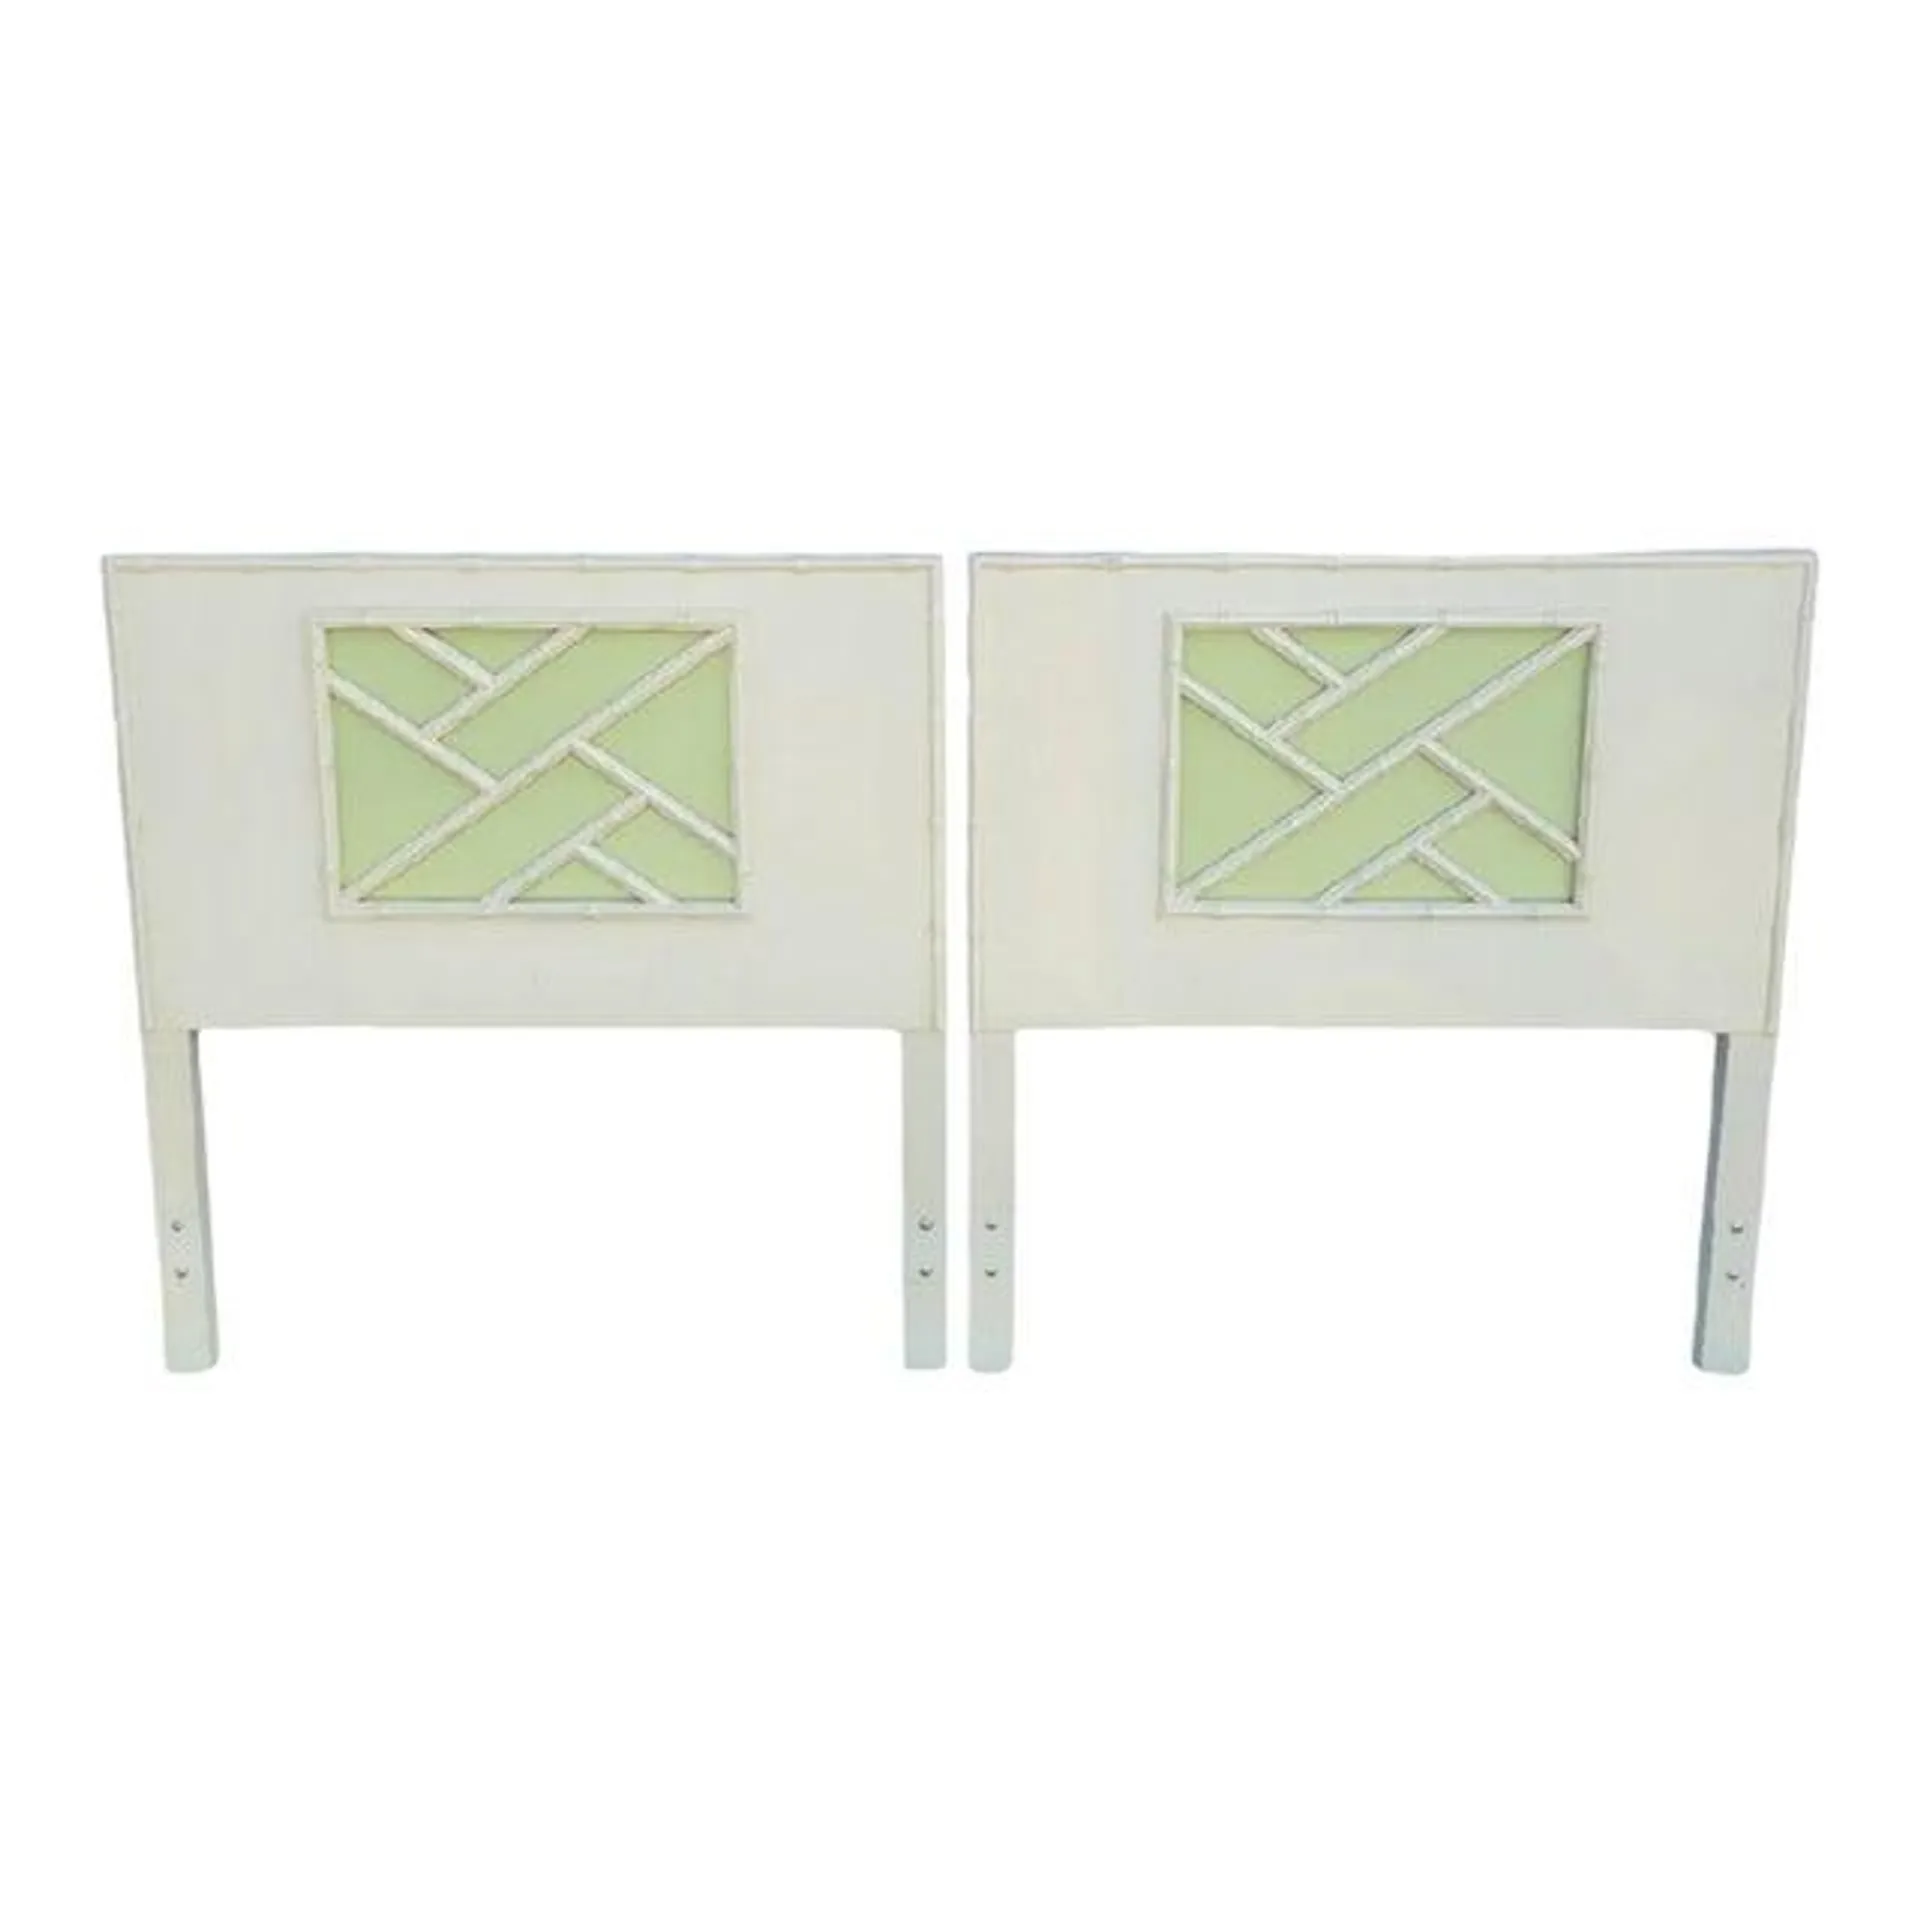 1970's Vintage Omega Chippendale Cream Celery Green Faux Bamboo Palm Beach Regency Twin Headboards- a Pair